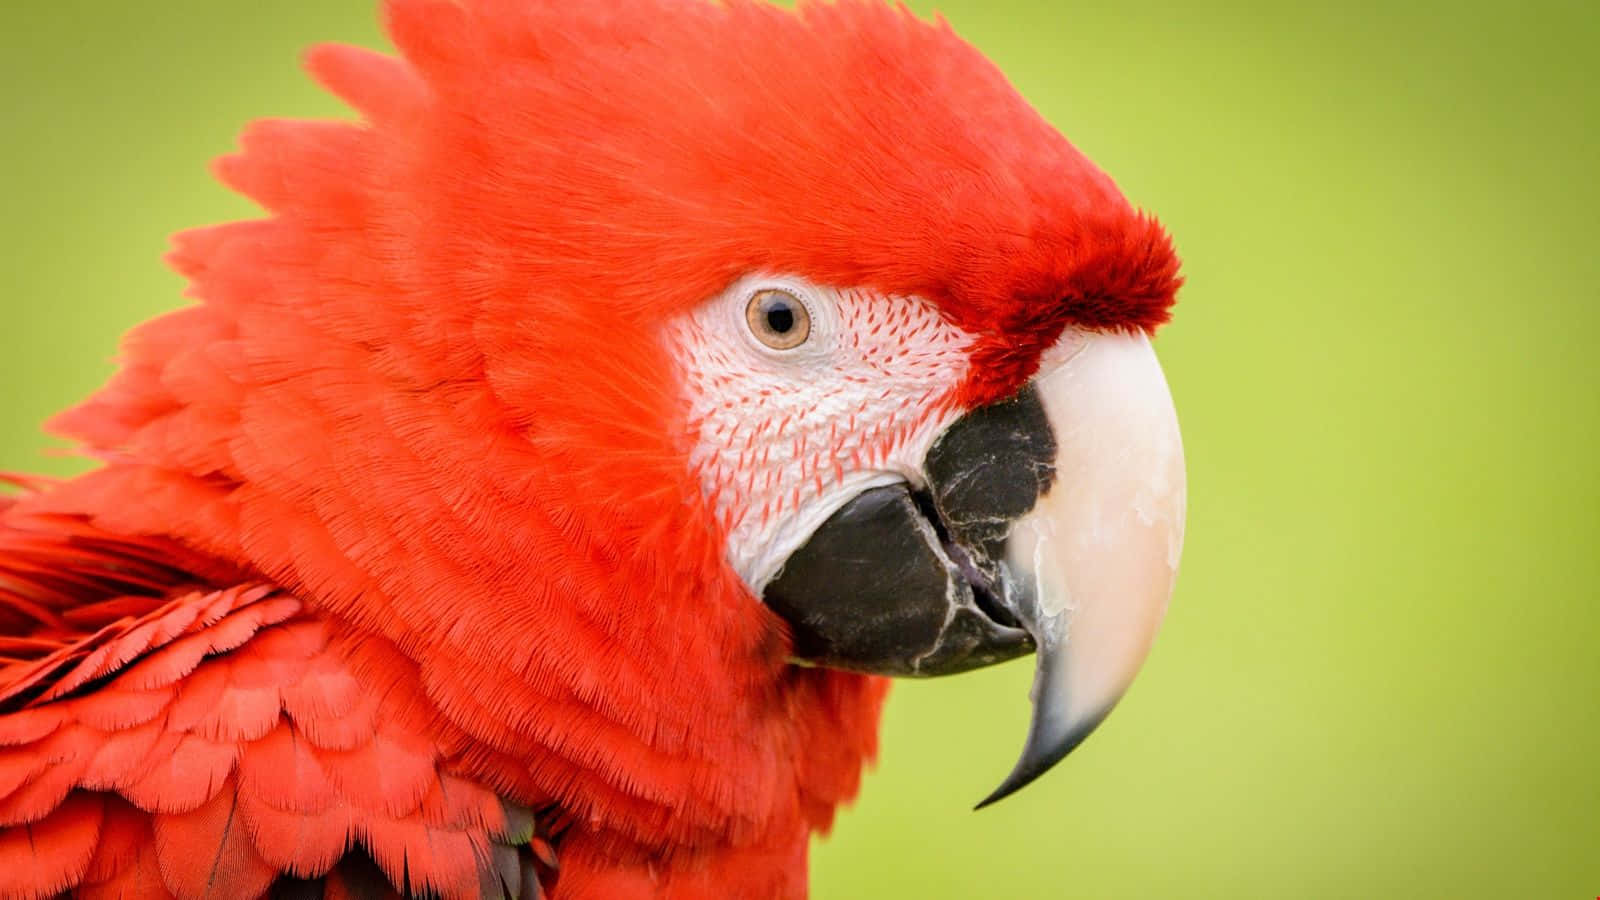 Meet the dazzlingly colored parrot!